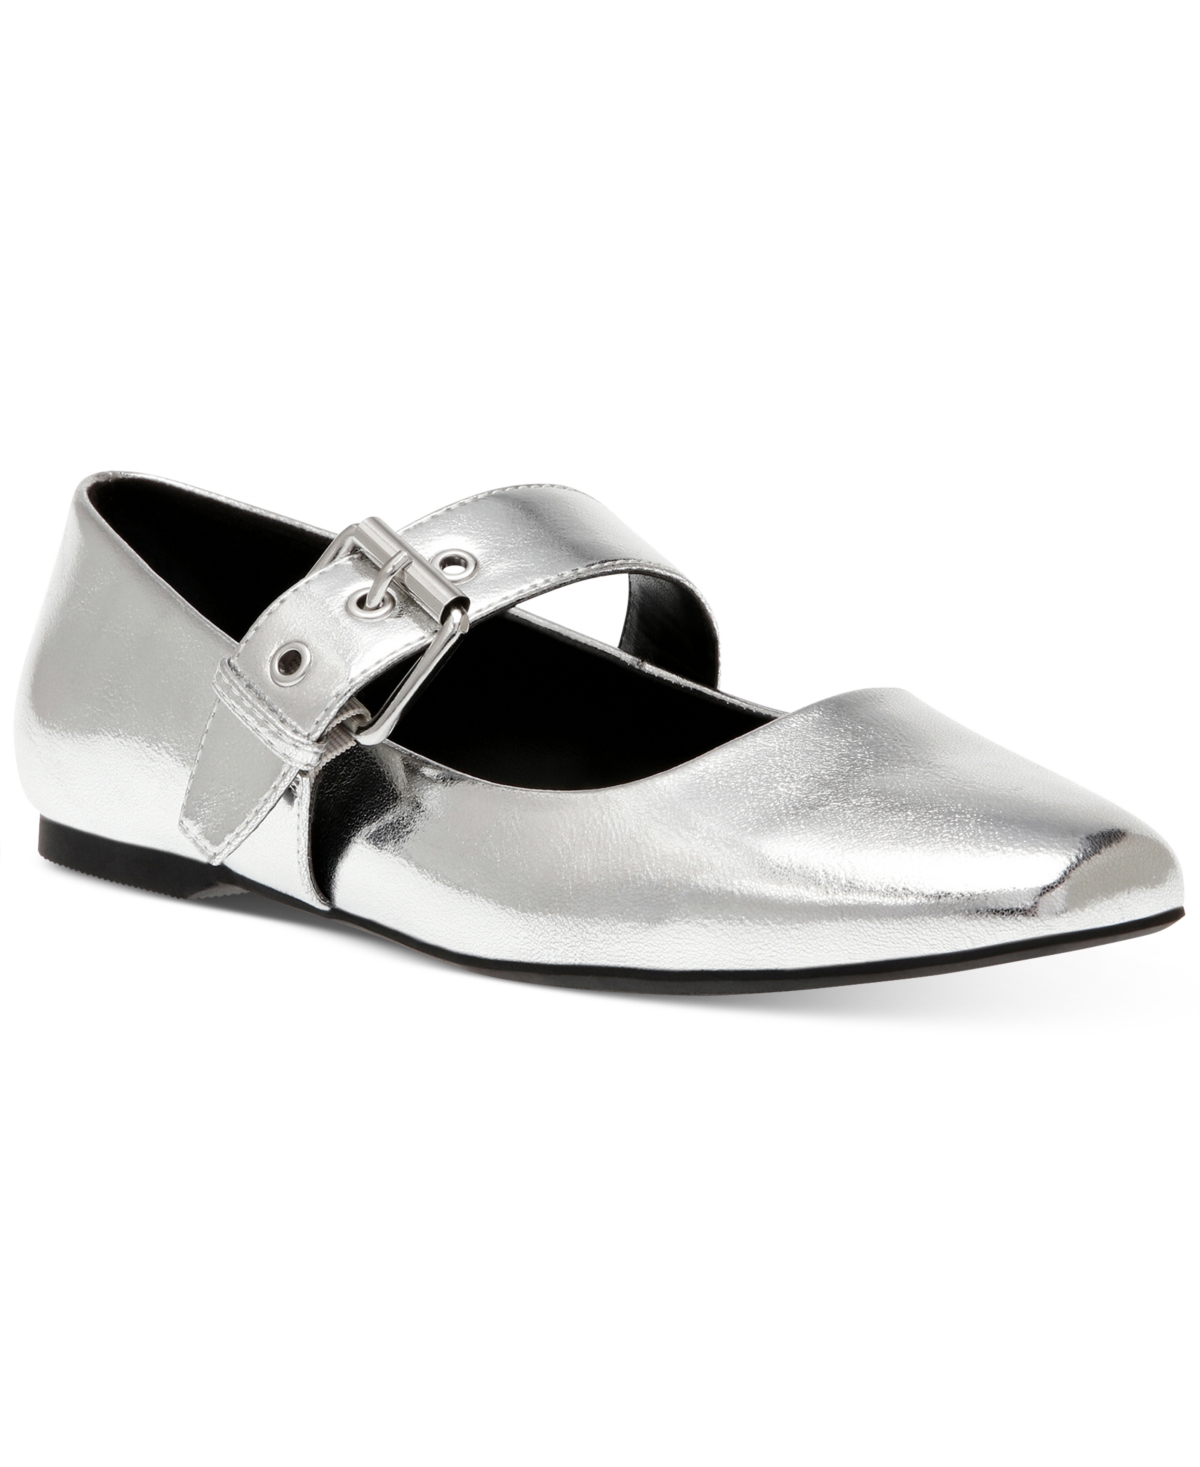 Women's Mellie Buckle Strap Mary Jane Flats - Black Patent